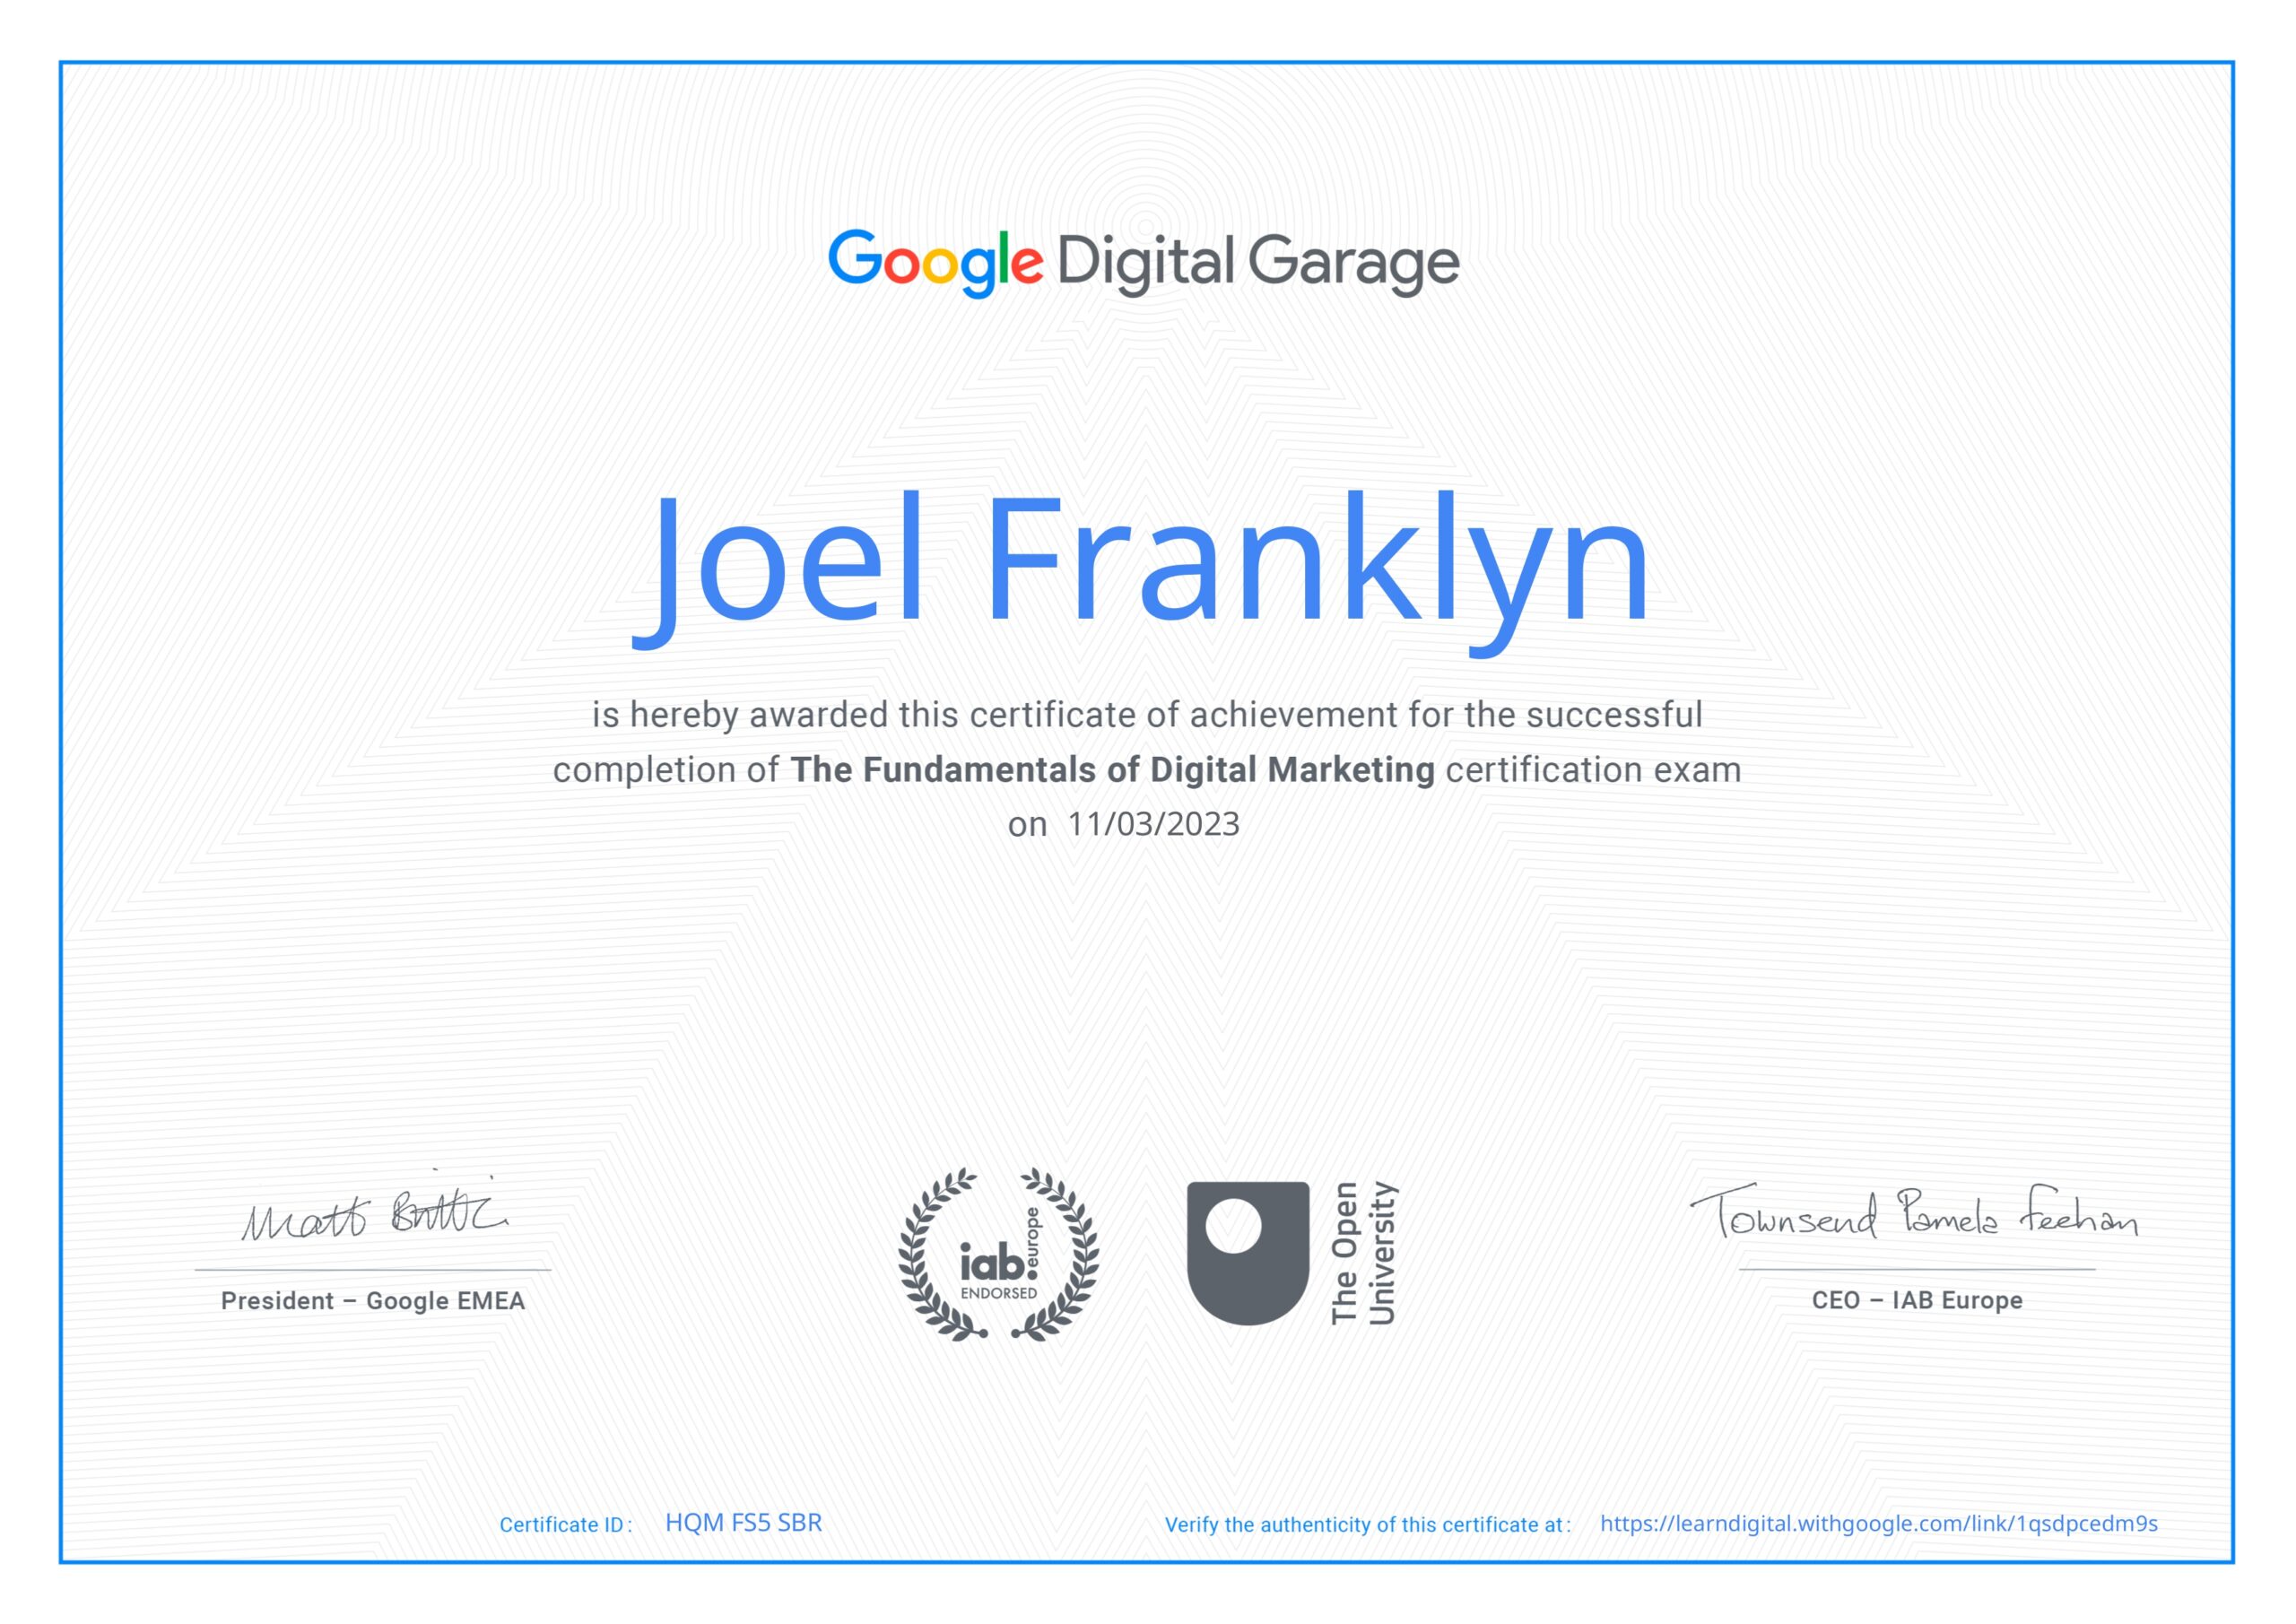 Joel Franklyn successfully completed the Google Digital Garage course!